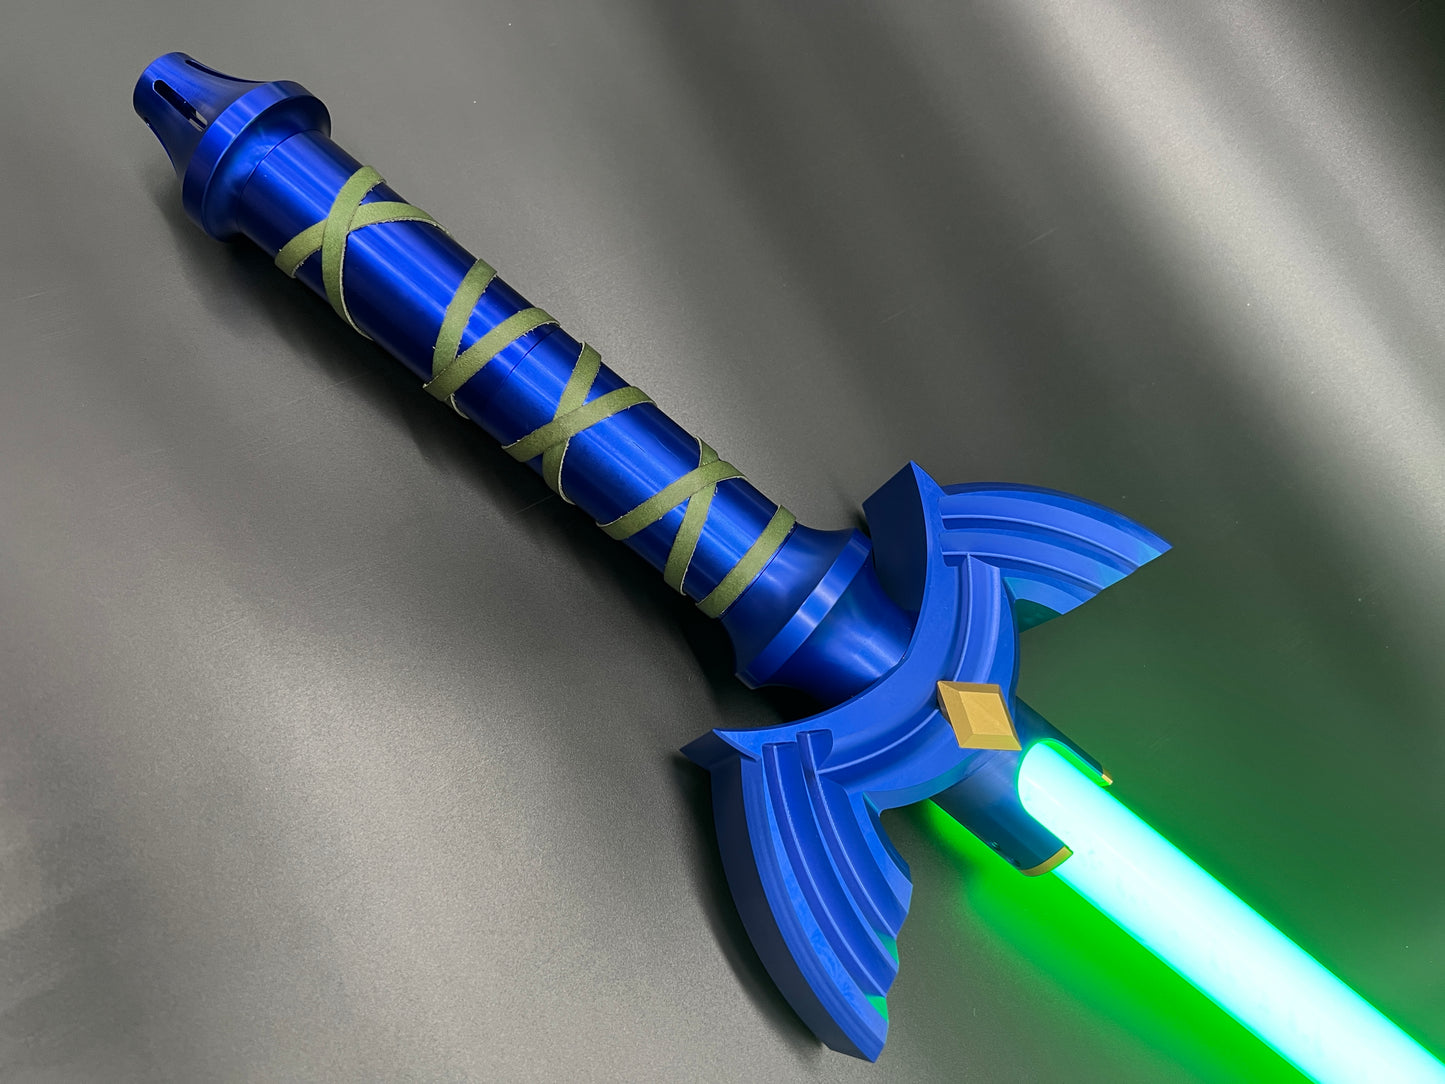 THE SWORD OF TIME LIGHTSABER